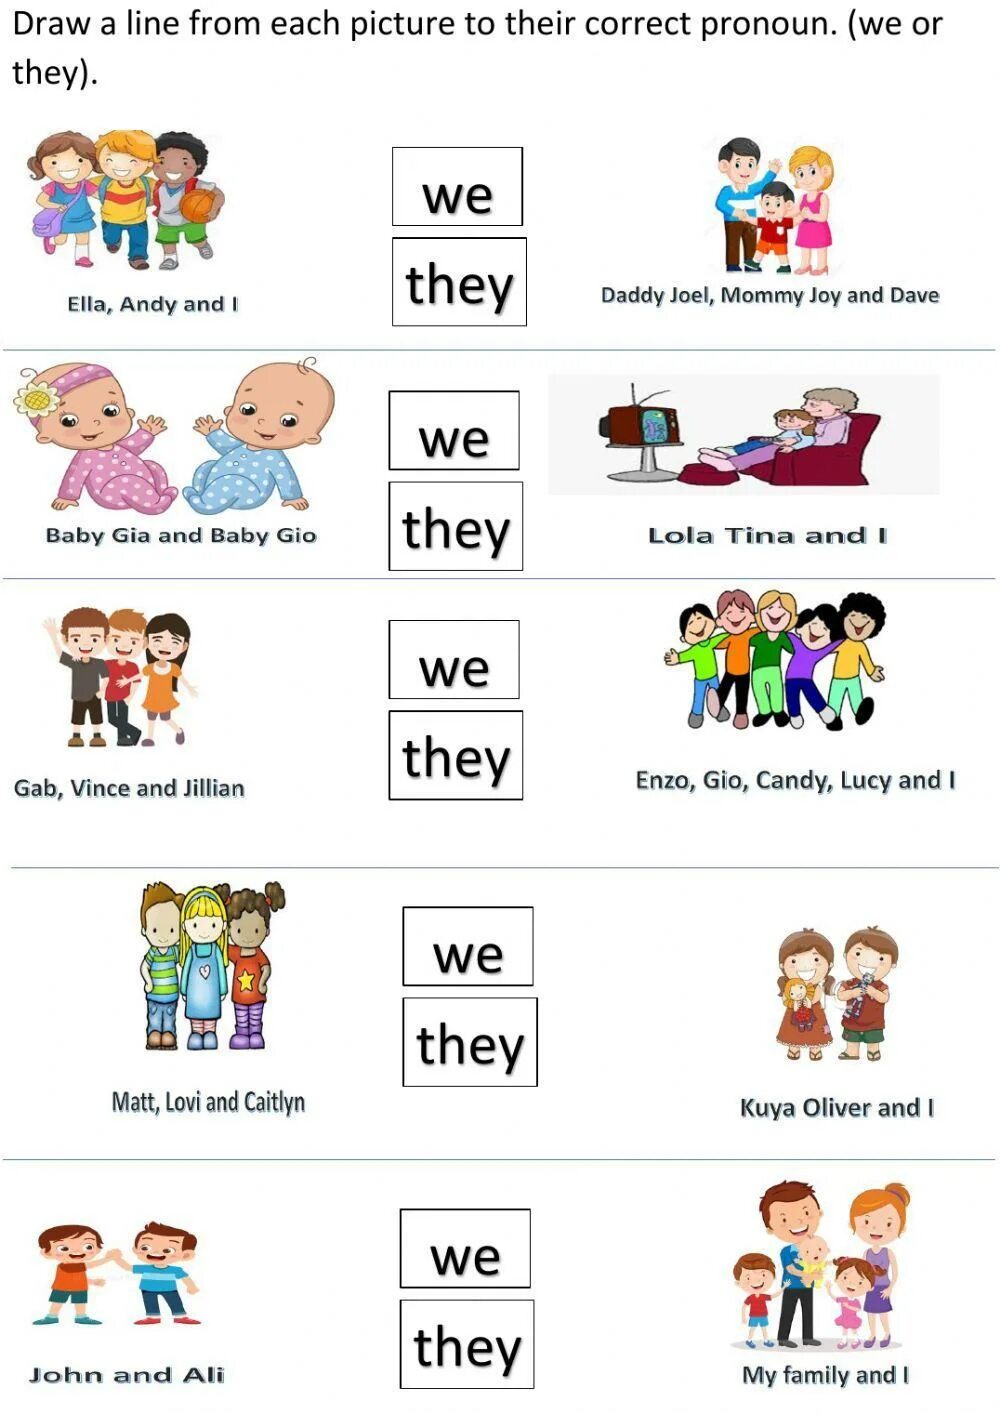 Children he she it they. Местоимения him her them us it Worksheets. He she we they задания. Местоимения Worksheets for Kids. Types of English pronouns.